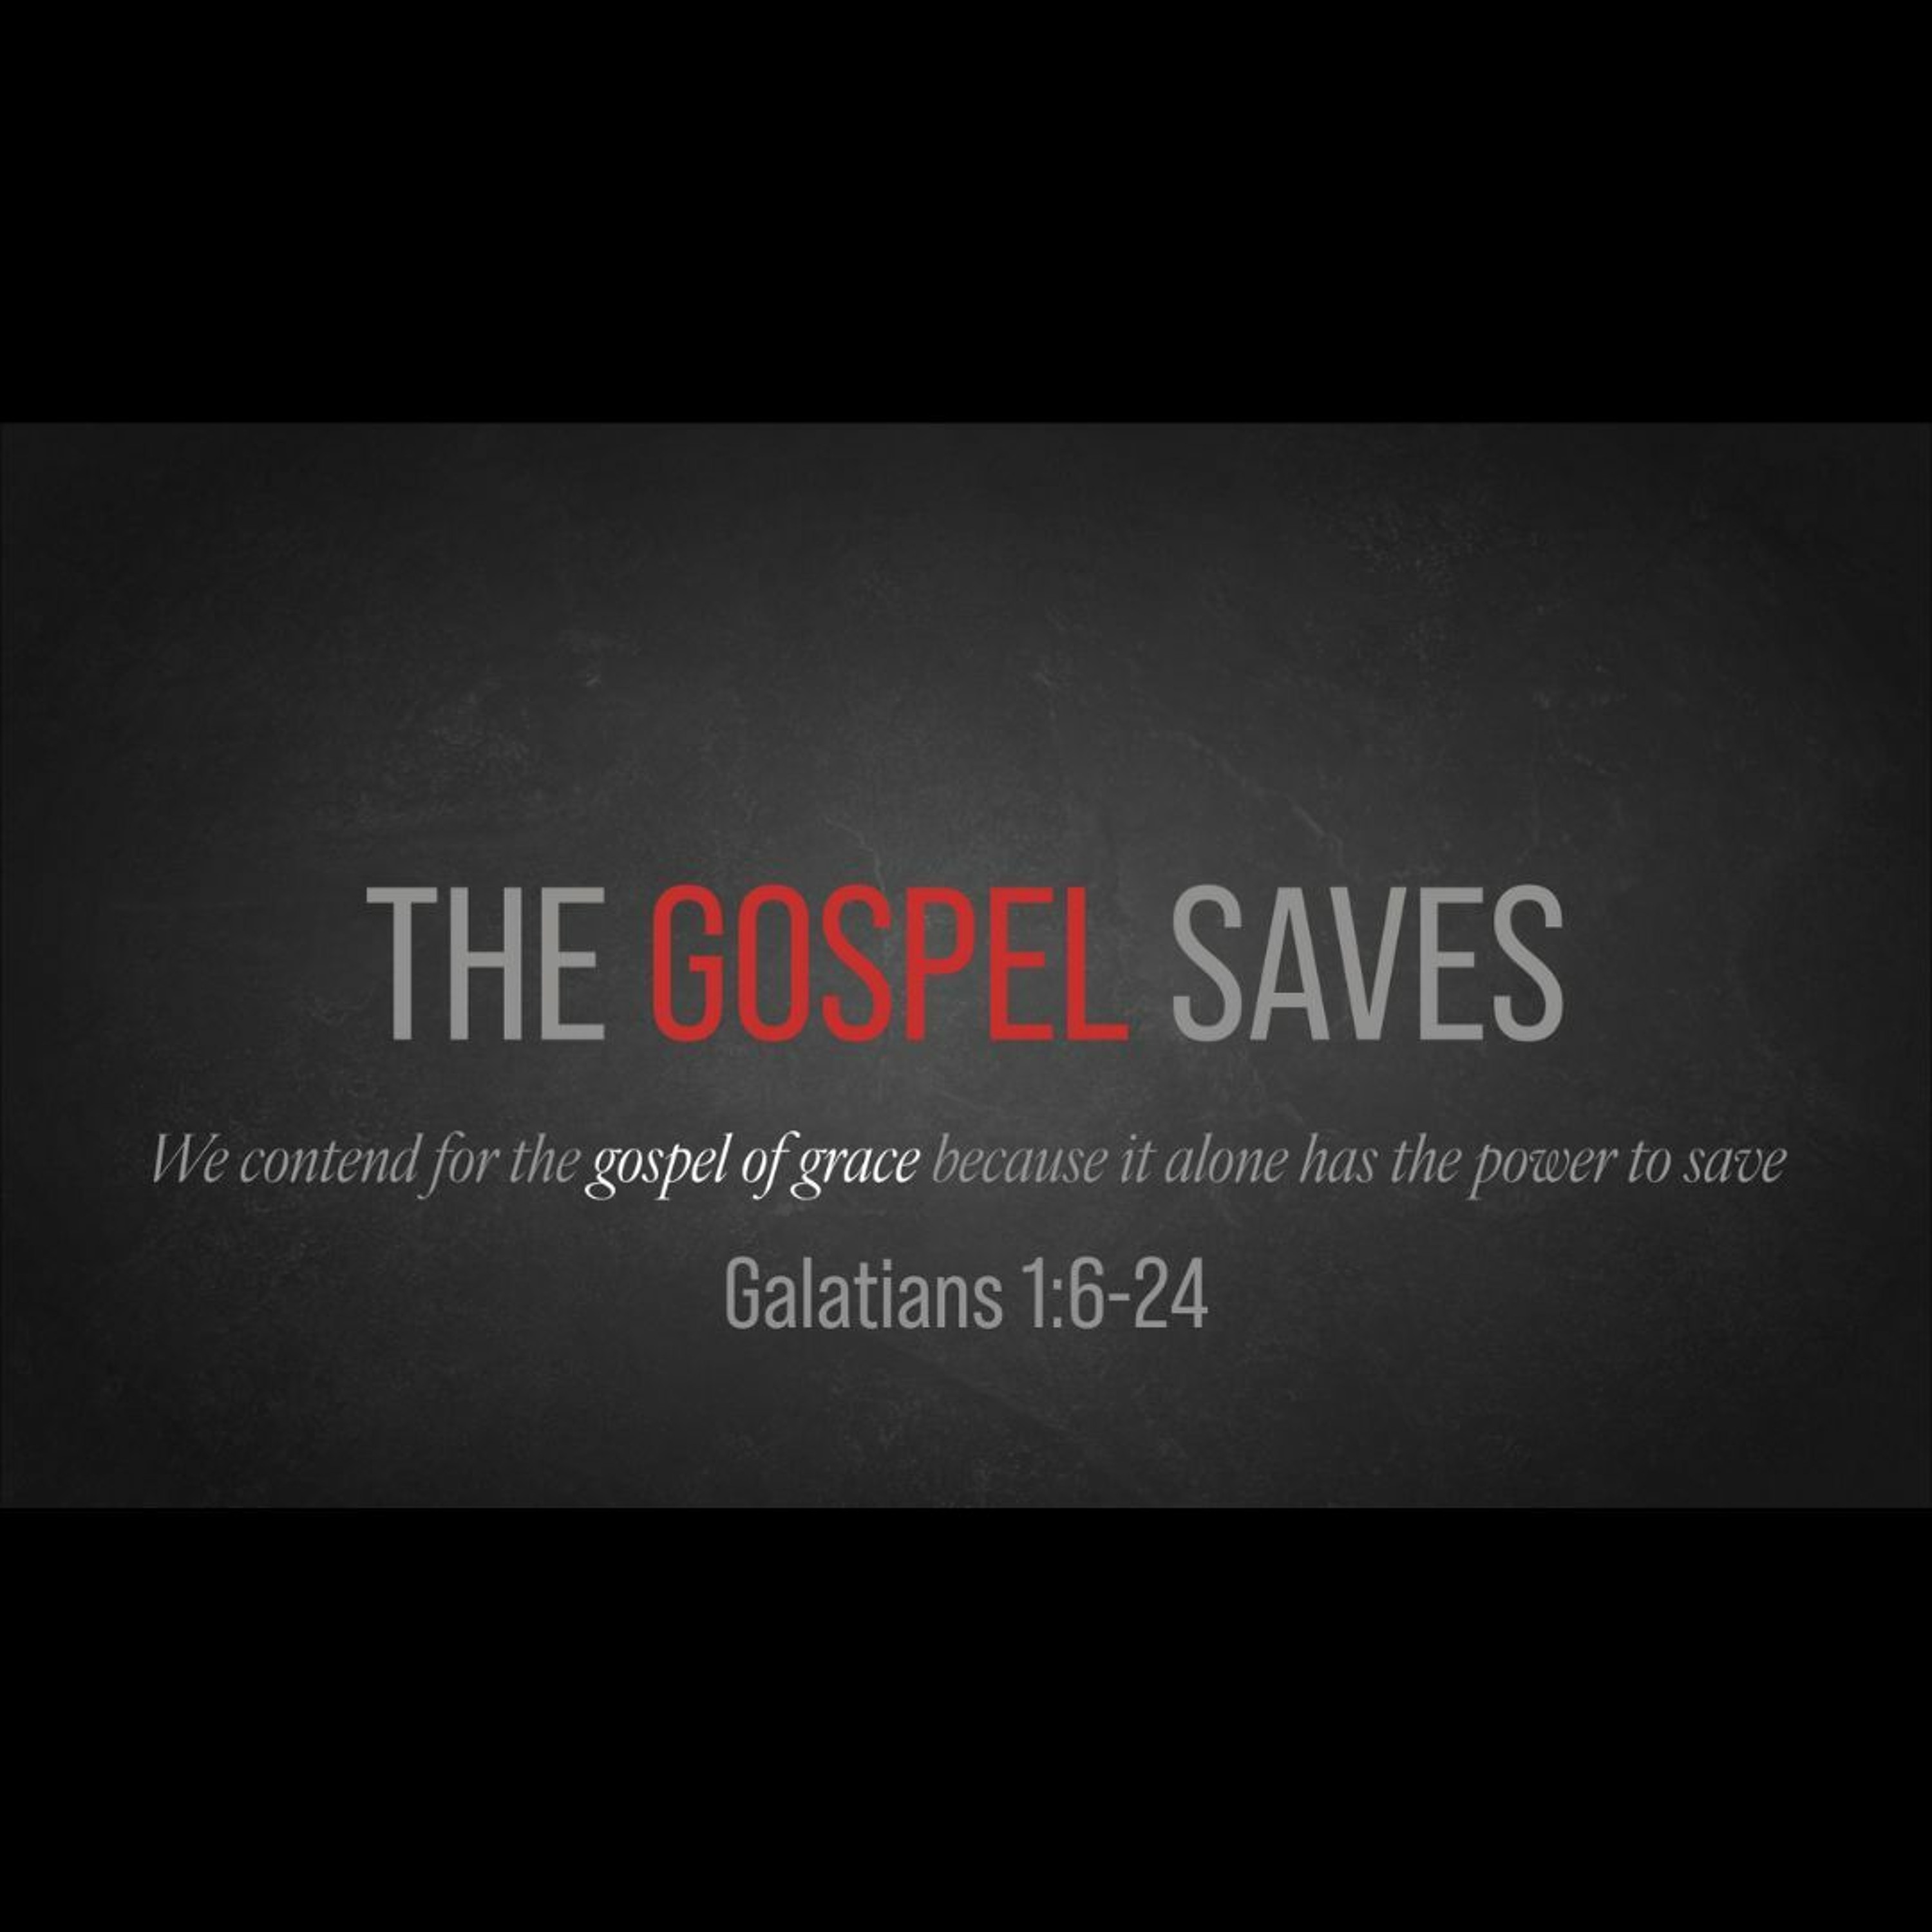 The Gospel Saves (Galations 1:6-24)